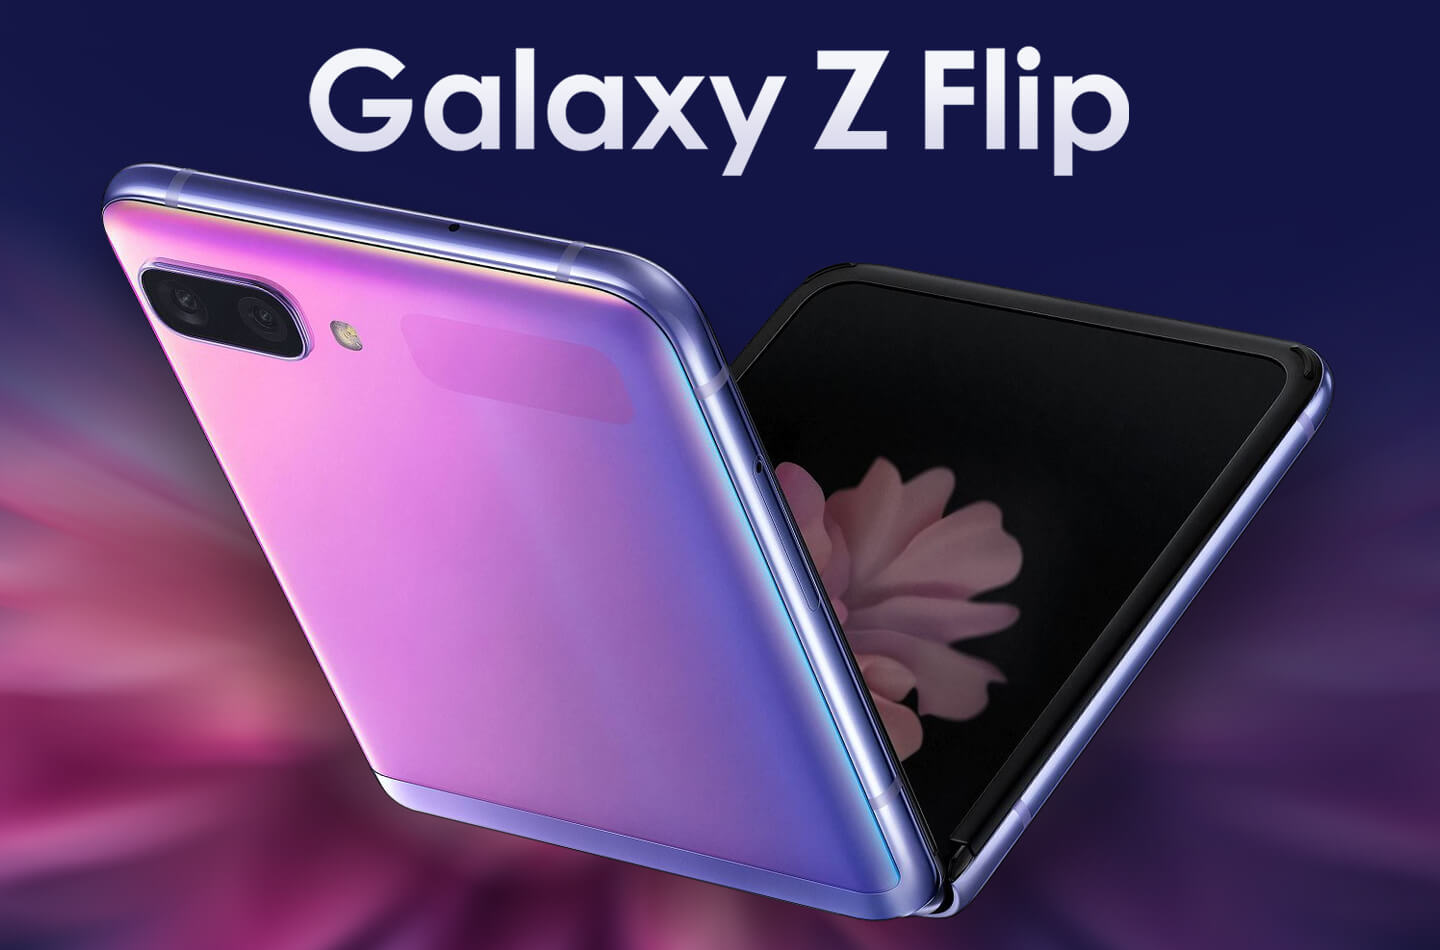 The Galaxy Z Flip may be what the Motorola Razr 2019 should have been, but it is still a waste of money - NotebookCheck.net News